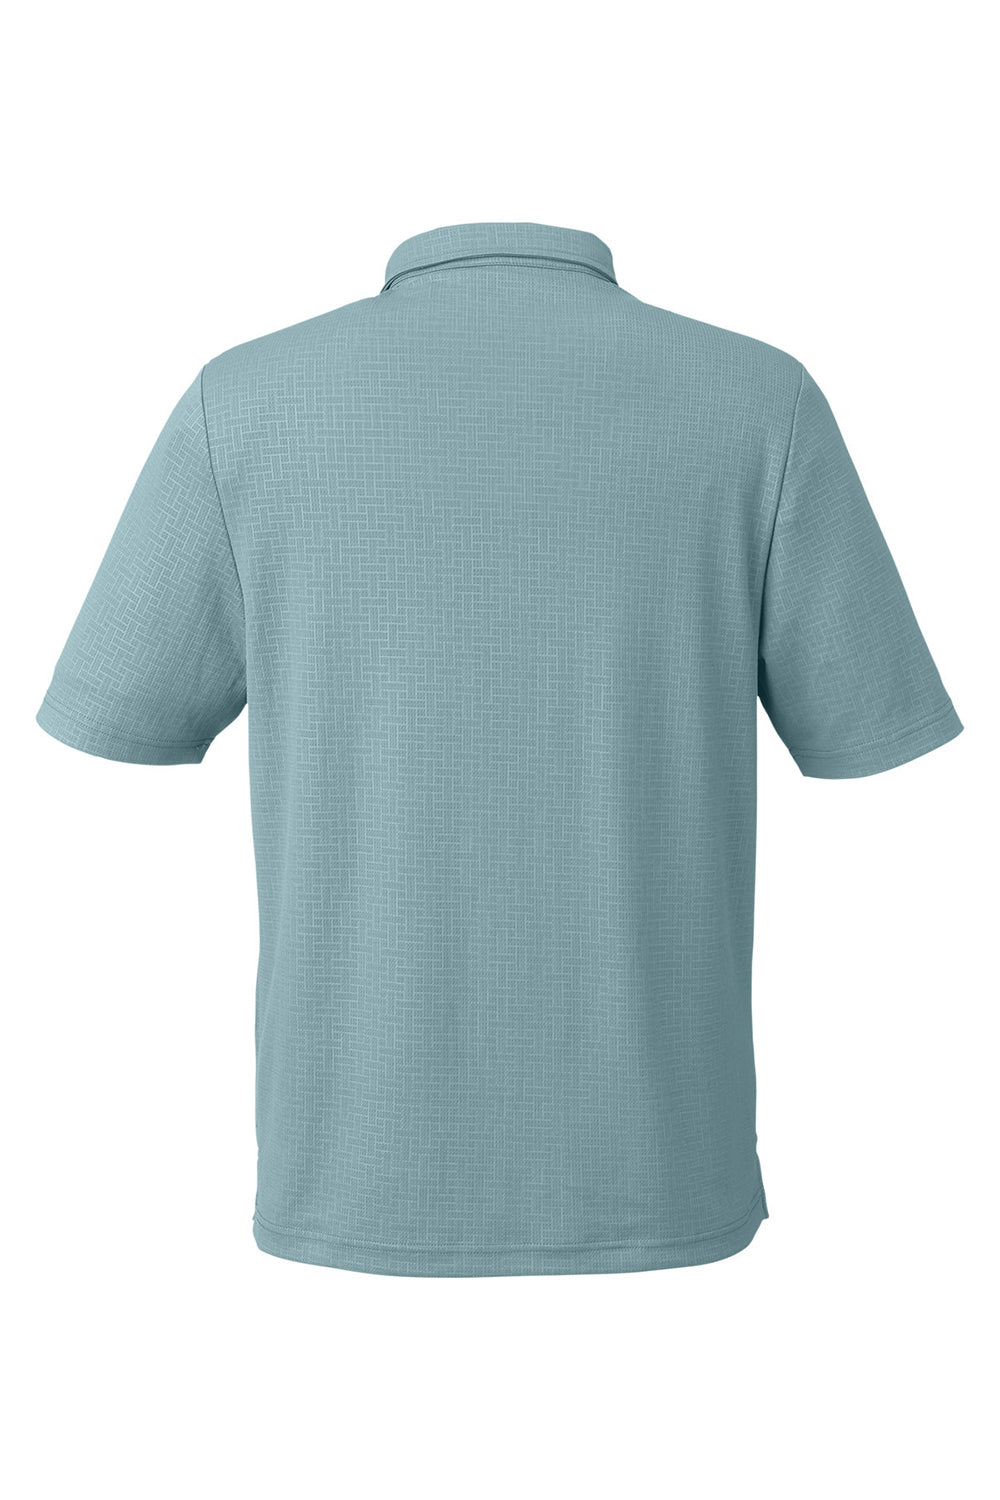 North End NE102 Mens Replay Recycled Short Sleeve Polo Shirt Opal Blue Flat Back